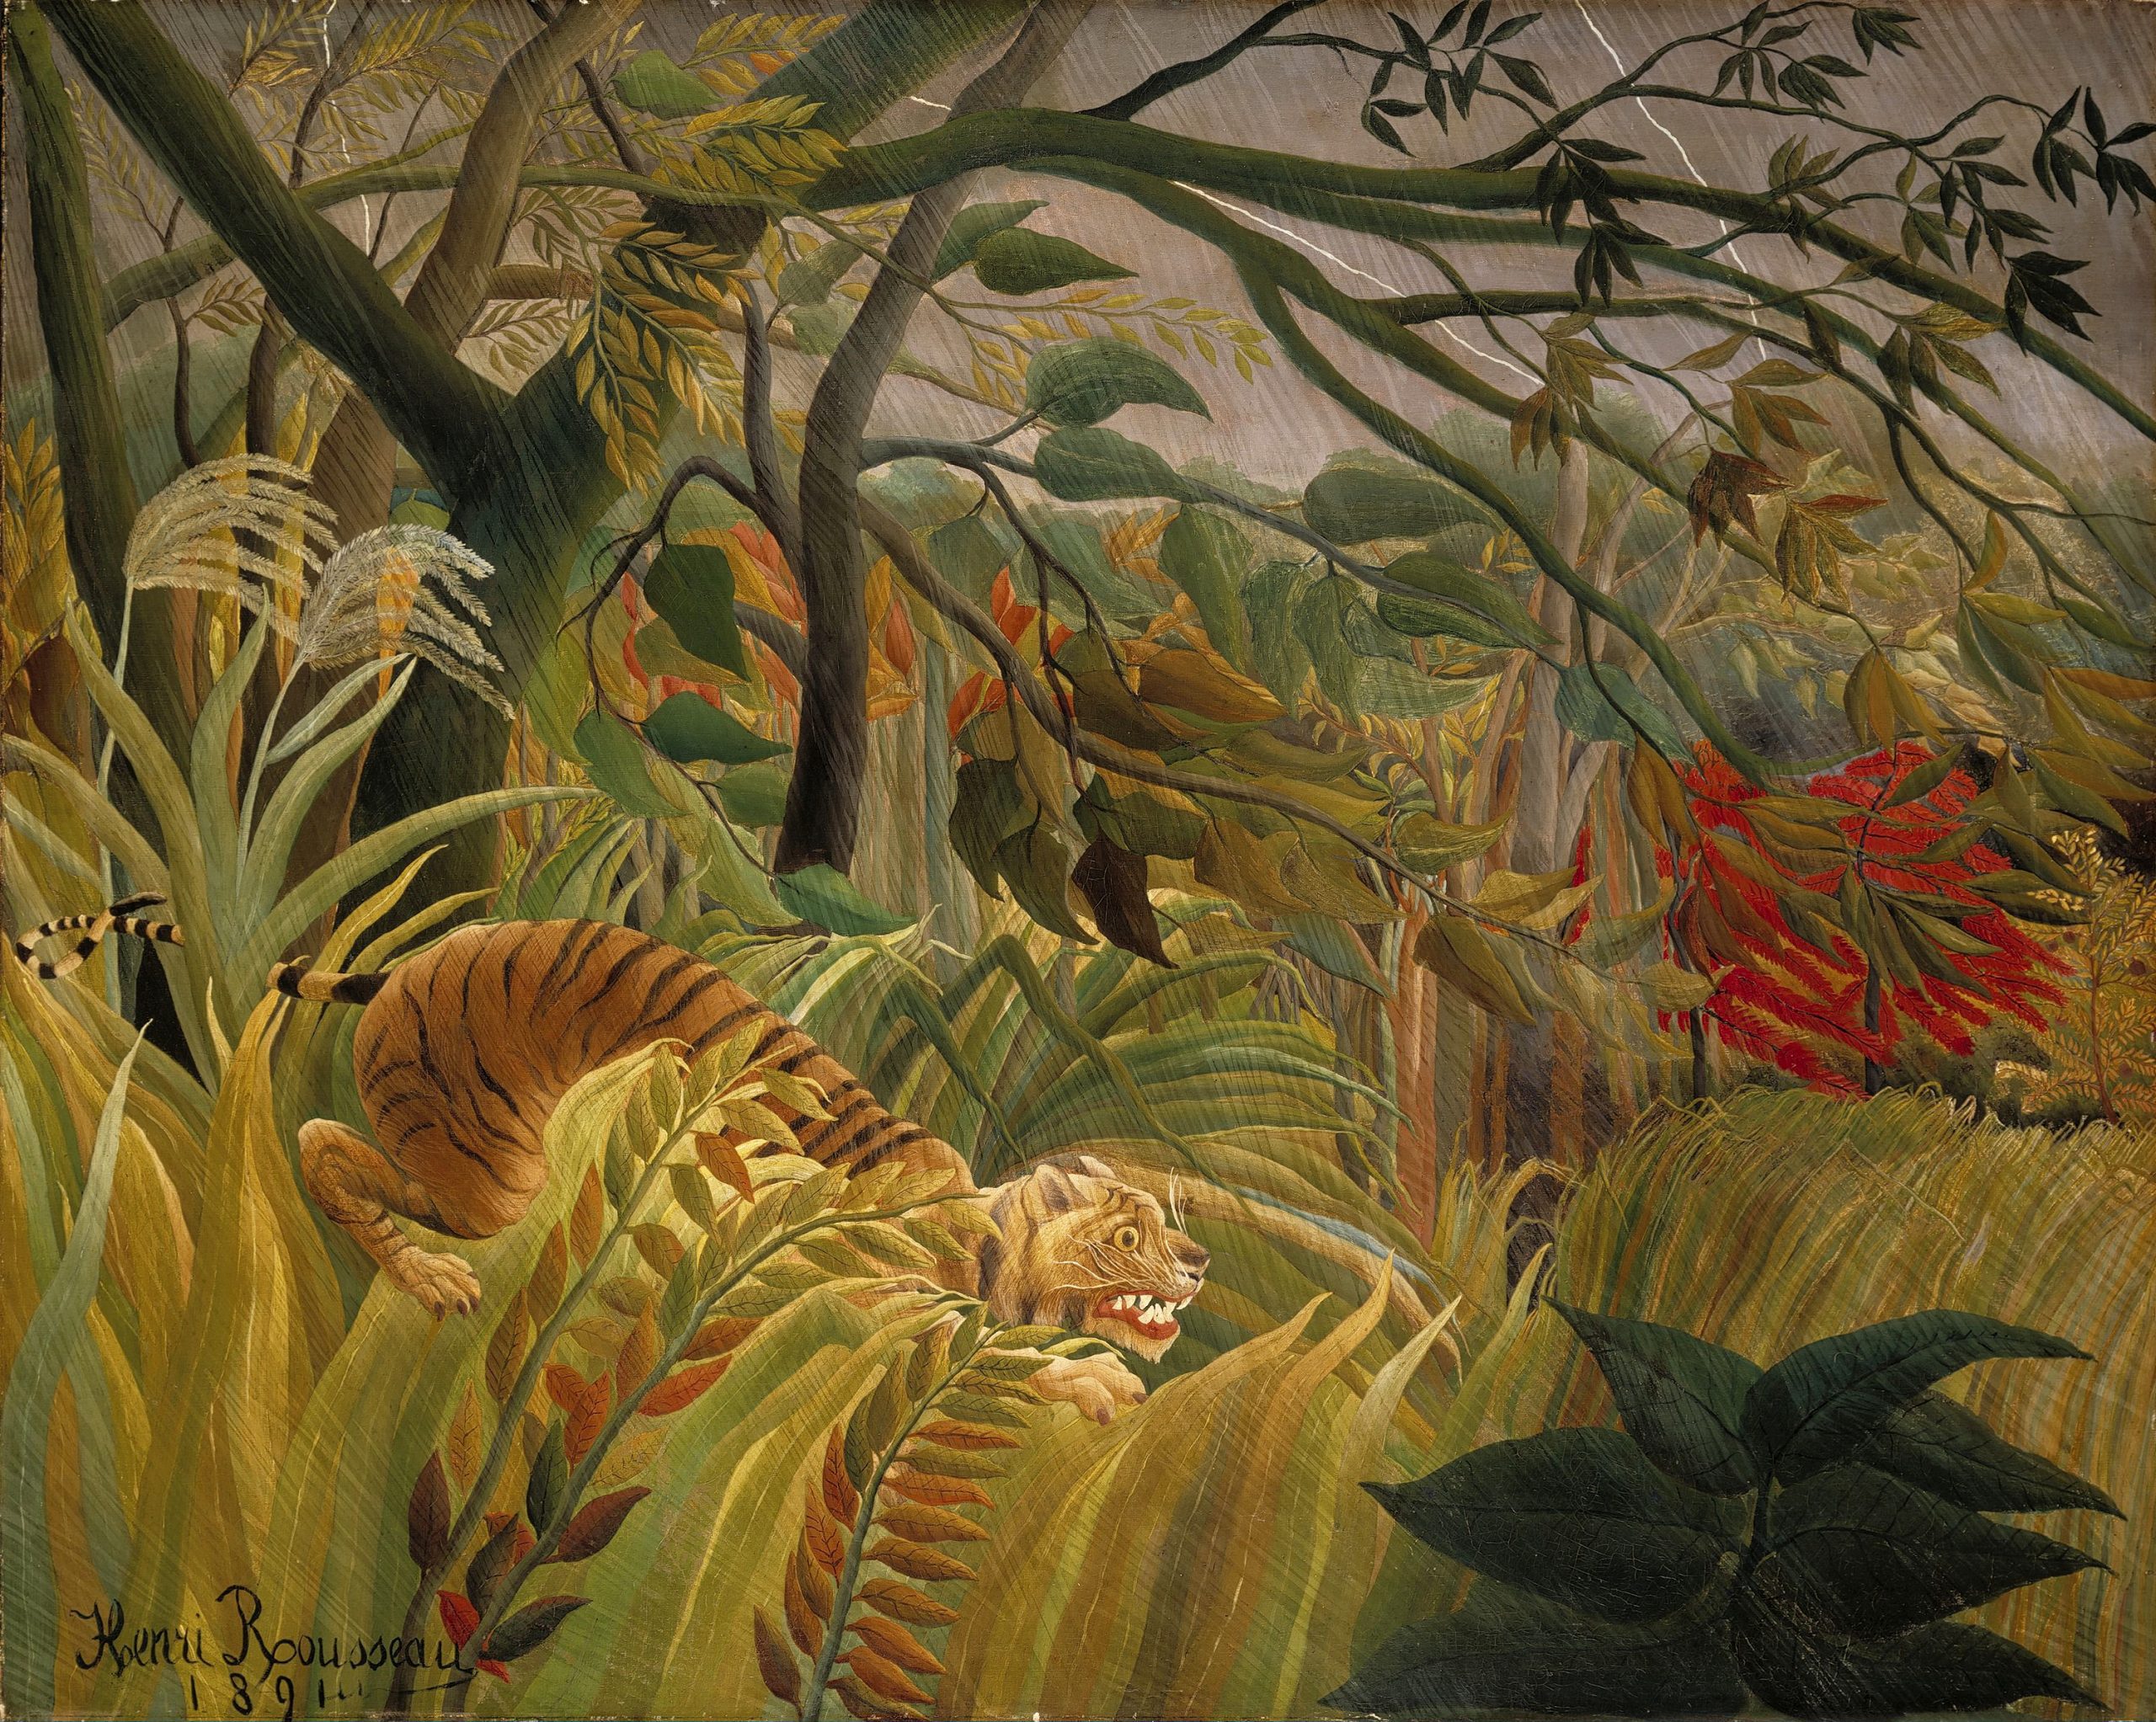 henri rousseau painting of tropical storm with a tiger